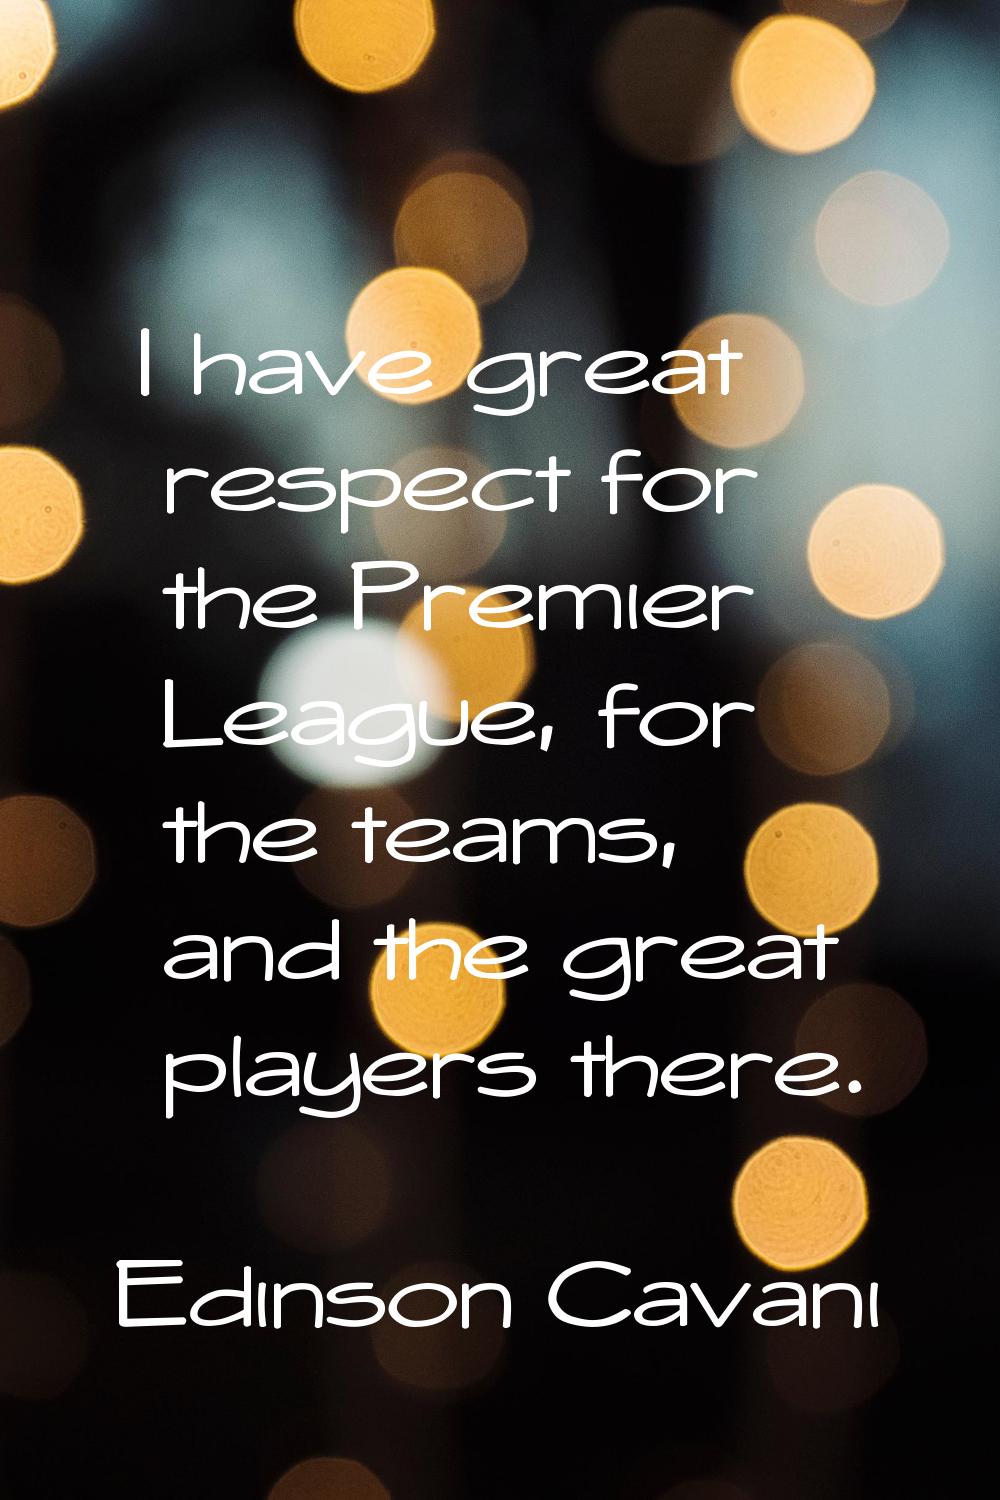 I have great respect for the Premier League, for the teams, and the great players there.